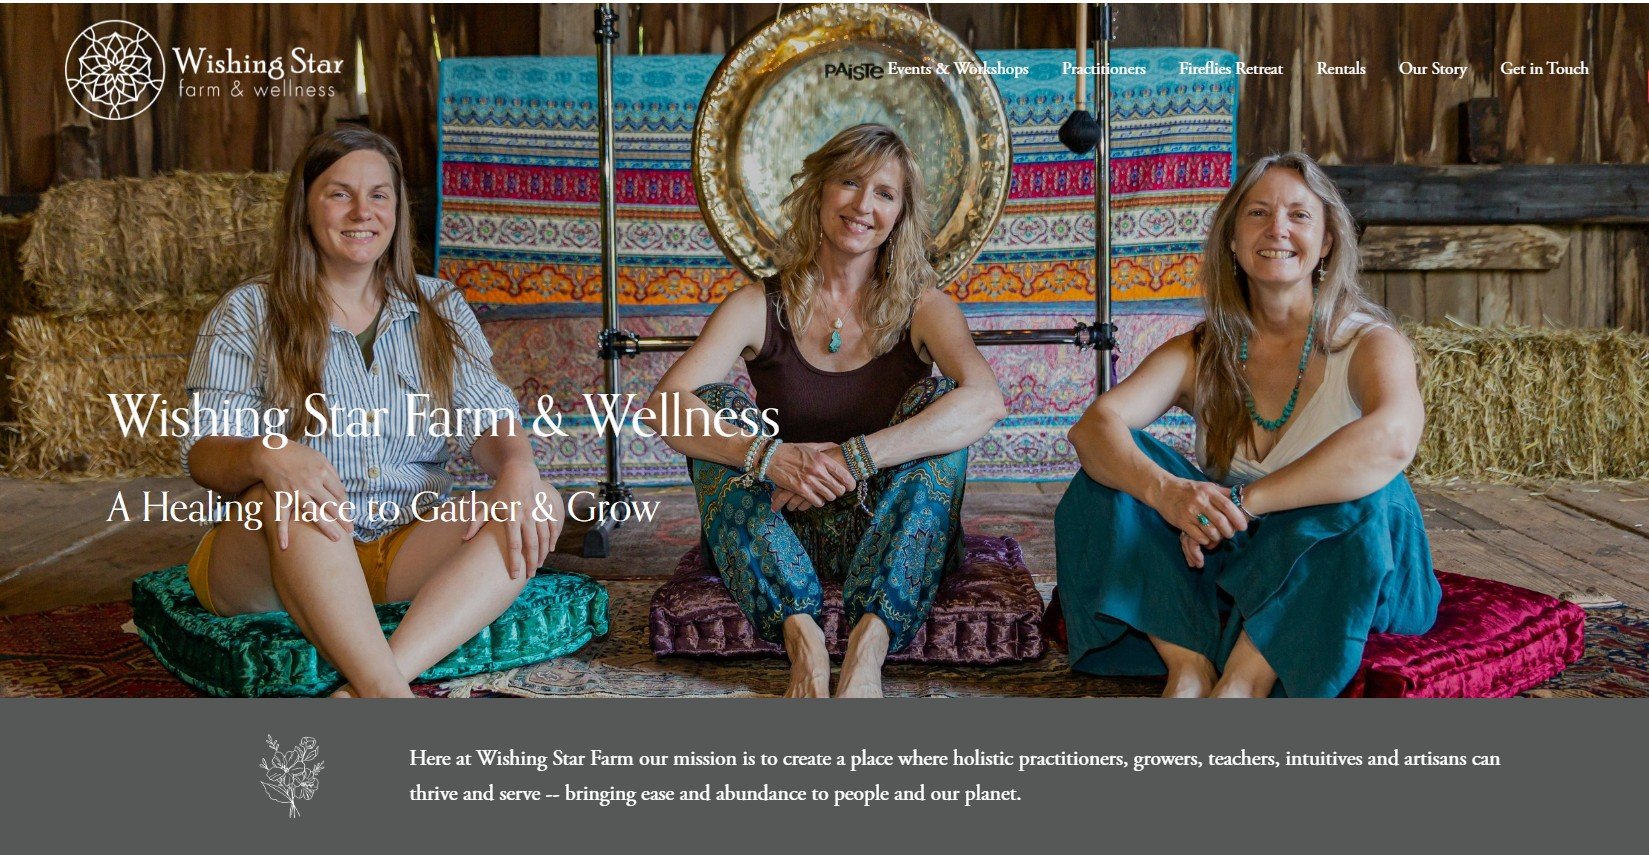 🌟 Exciting News &amp; A Quick Update from Wishing Star Farm &amp; Wellness 🌿

🎉 The GOOD News:
We're thrilled to announce that our brand new website is on its way! We've been working hard behind the scenes to create a fresh, vibrant online home th